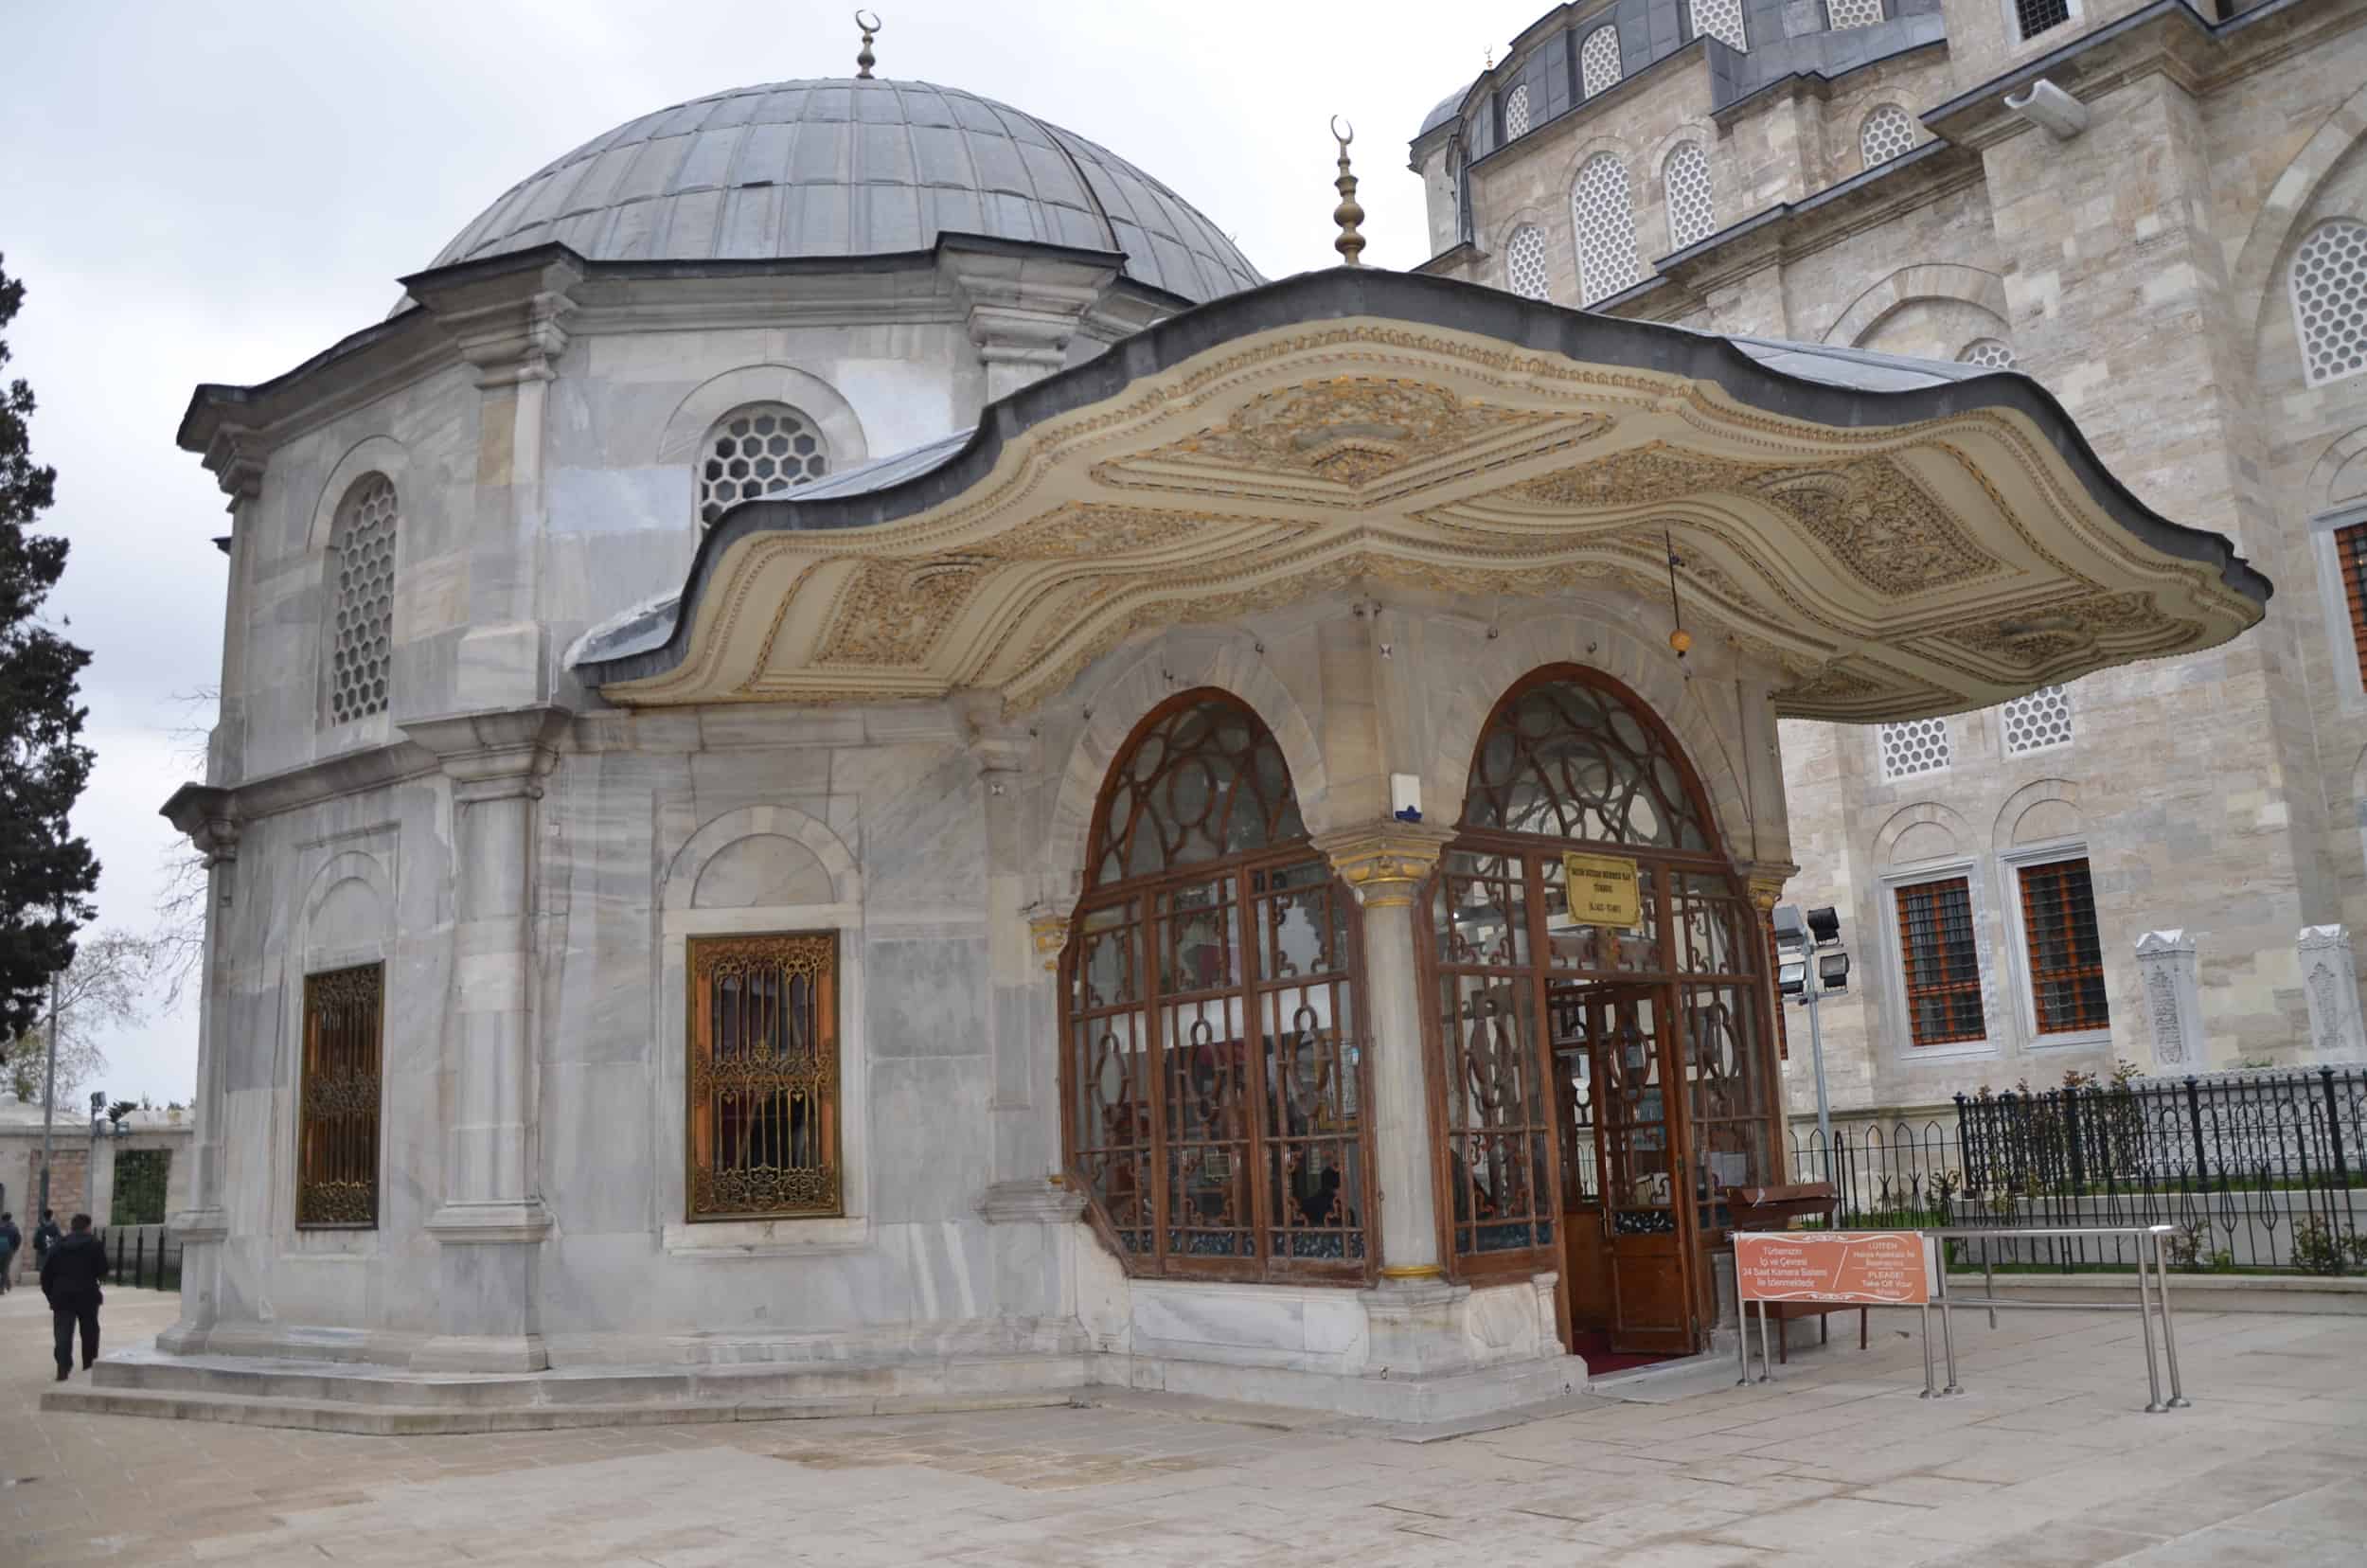 Tomb of Mehmed II at the Fatih Mosque in Istanbul, Turkey